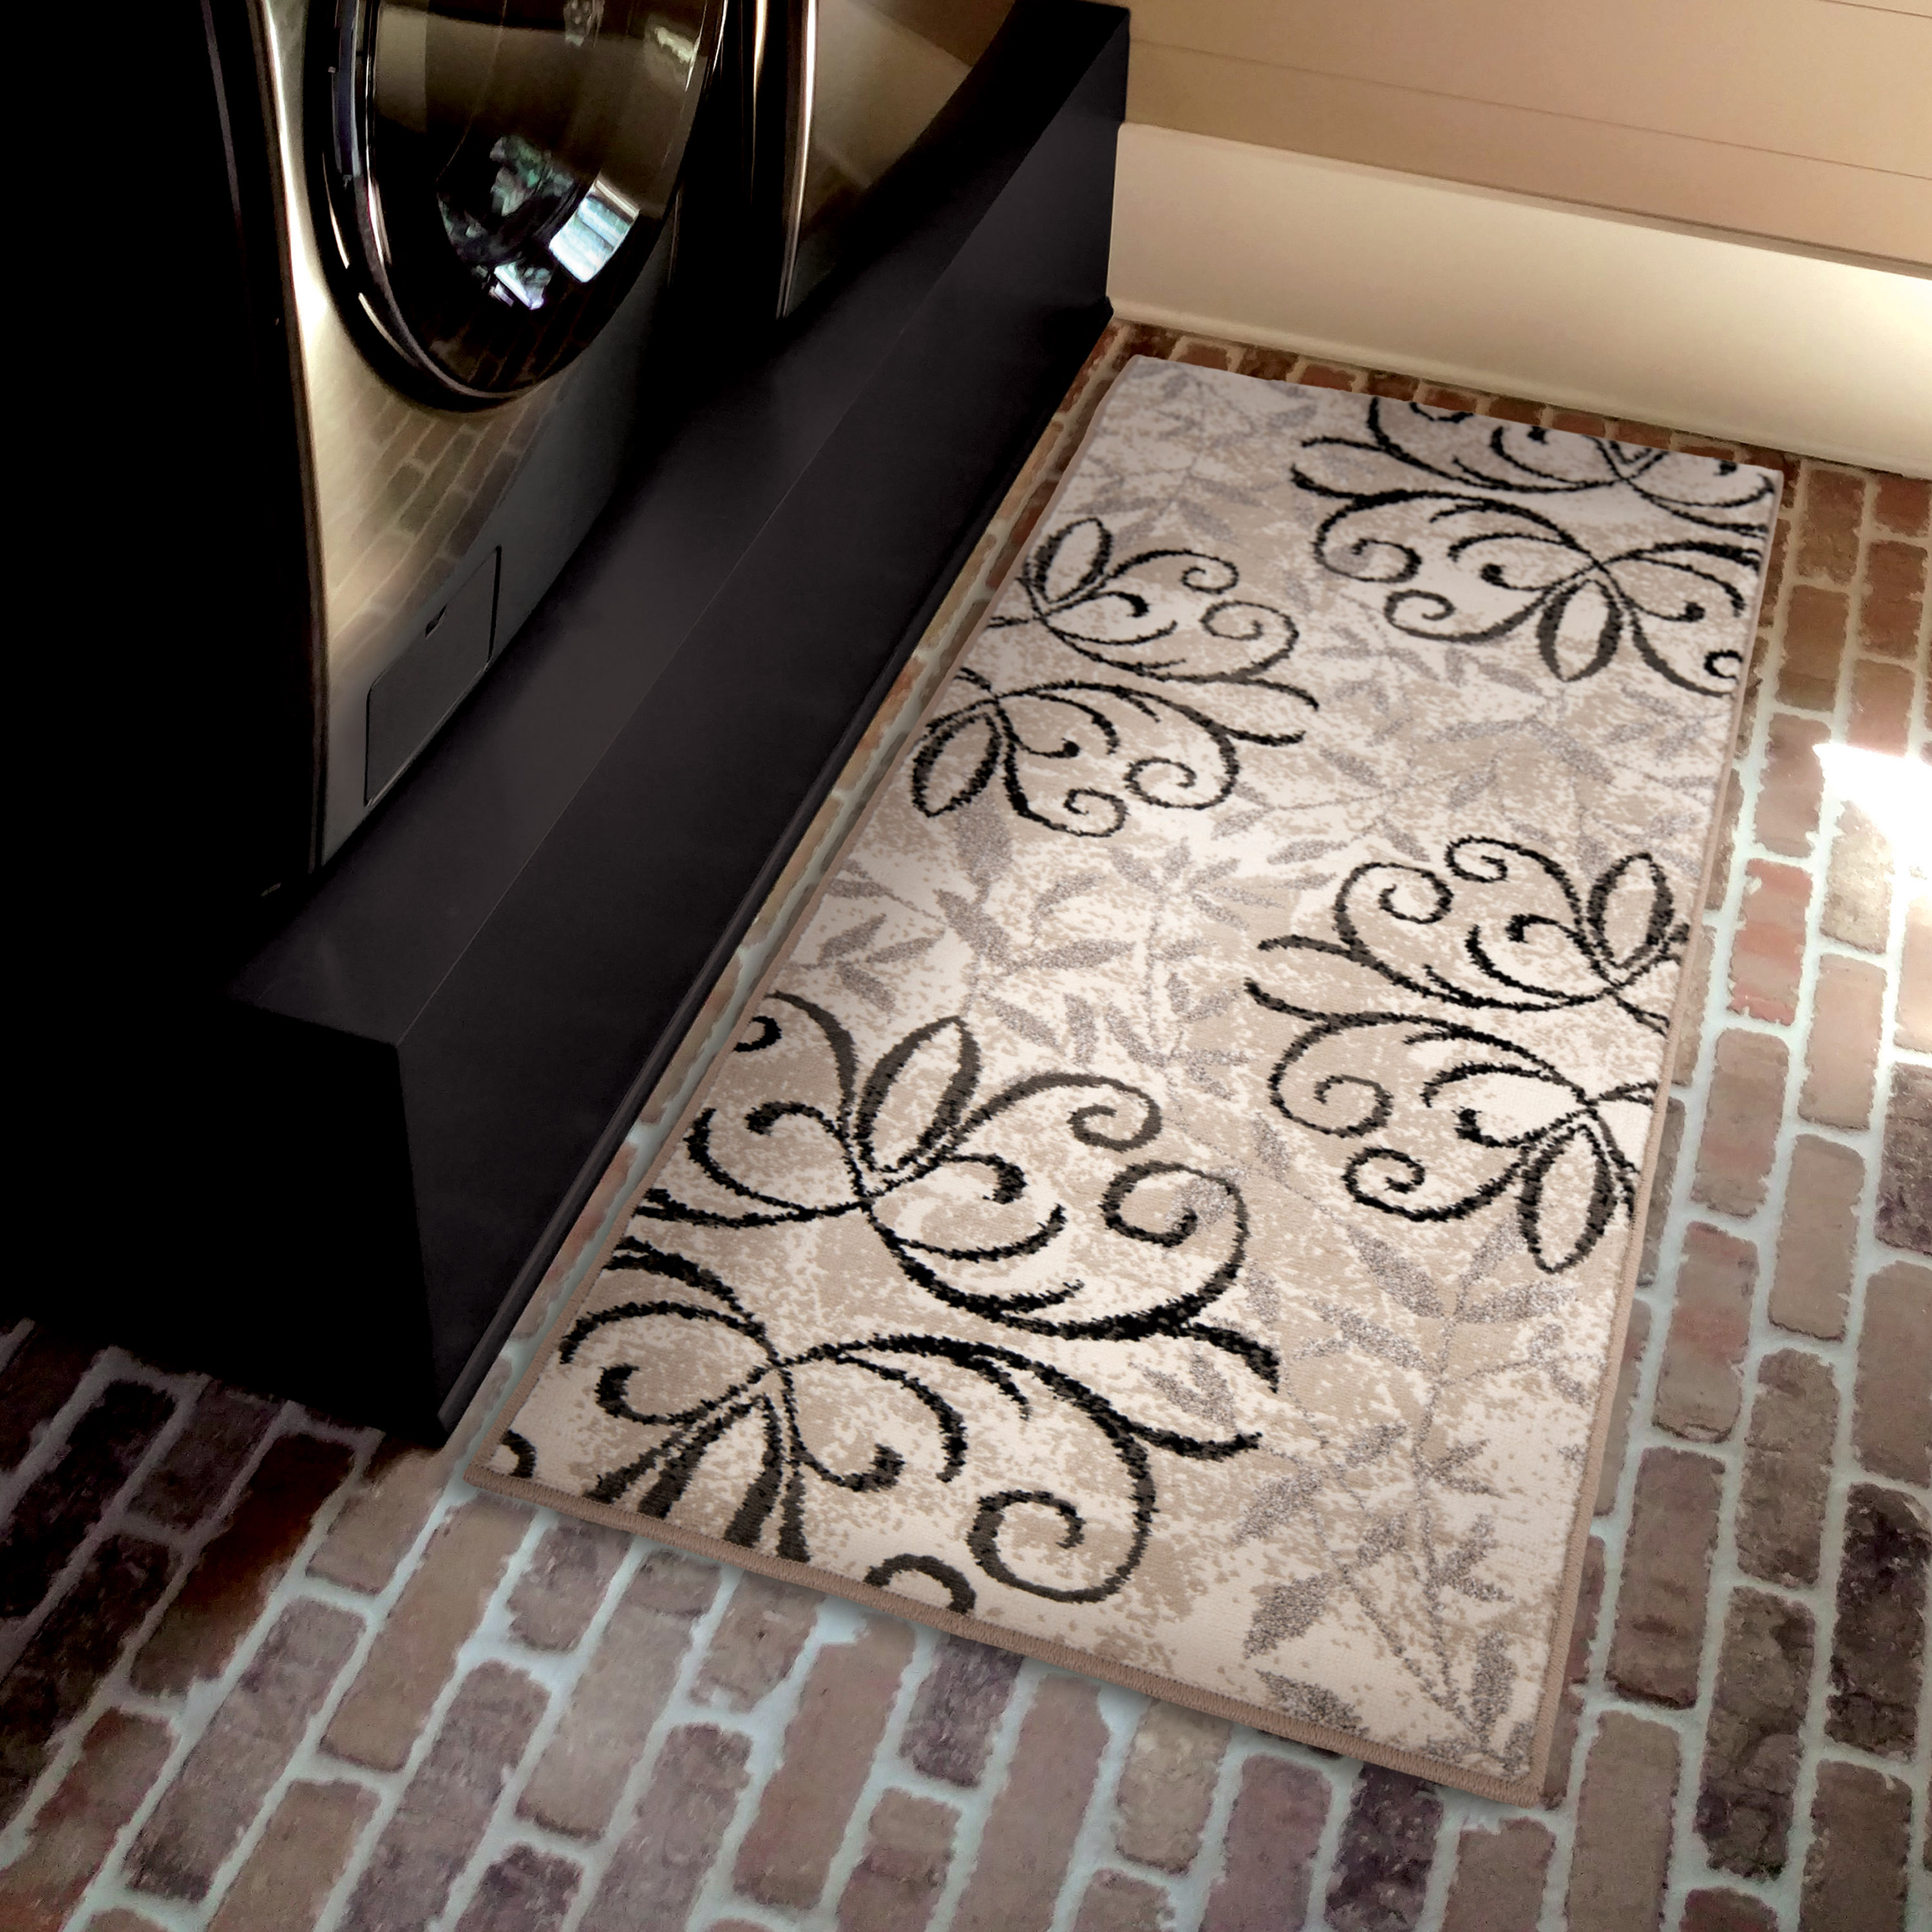 Better Homes & Gardens Iron Fleur Area Rug, Off-White, 1'11" x 7'5" - image 9 of 9